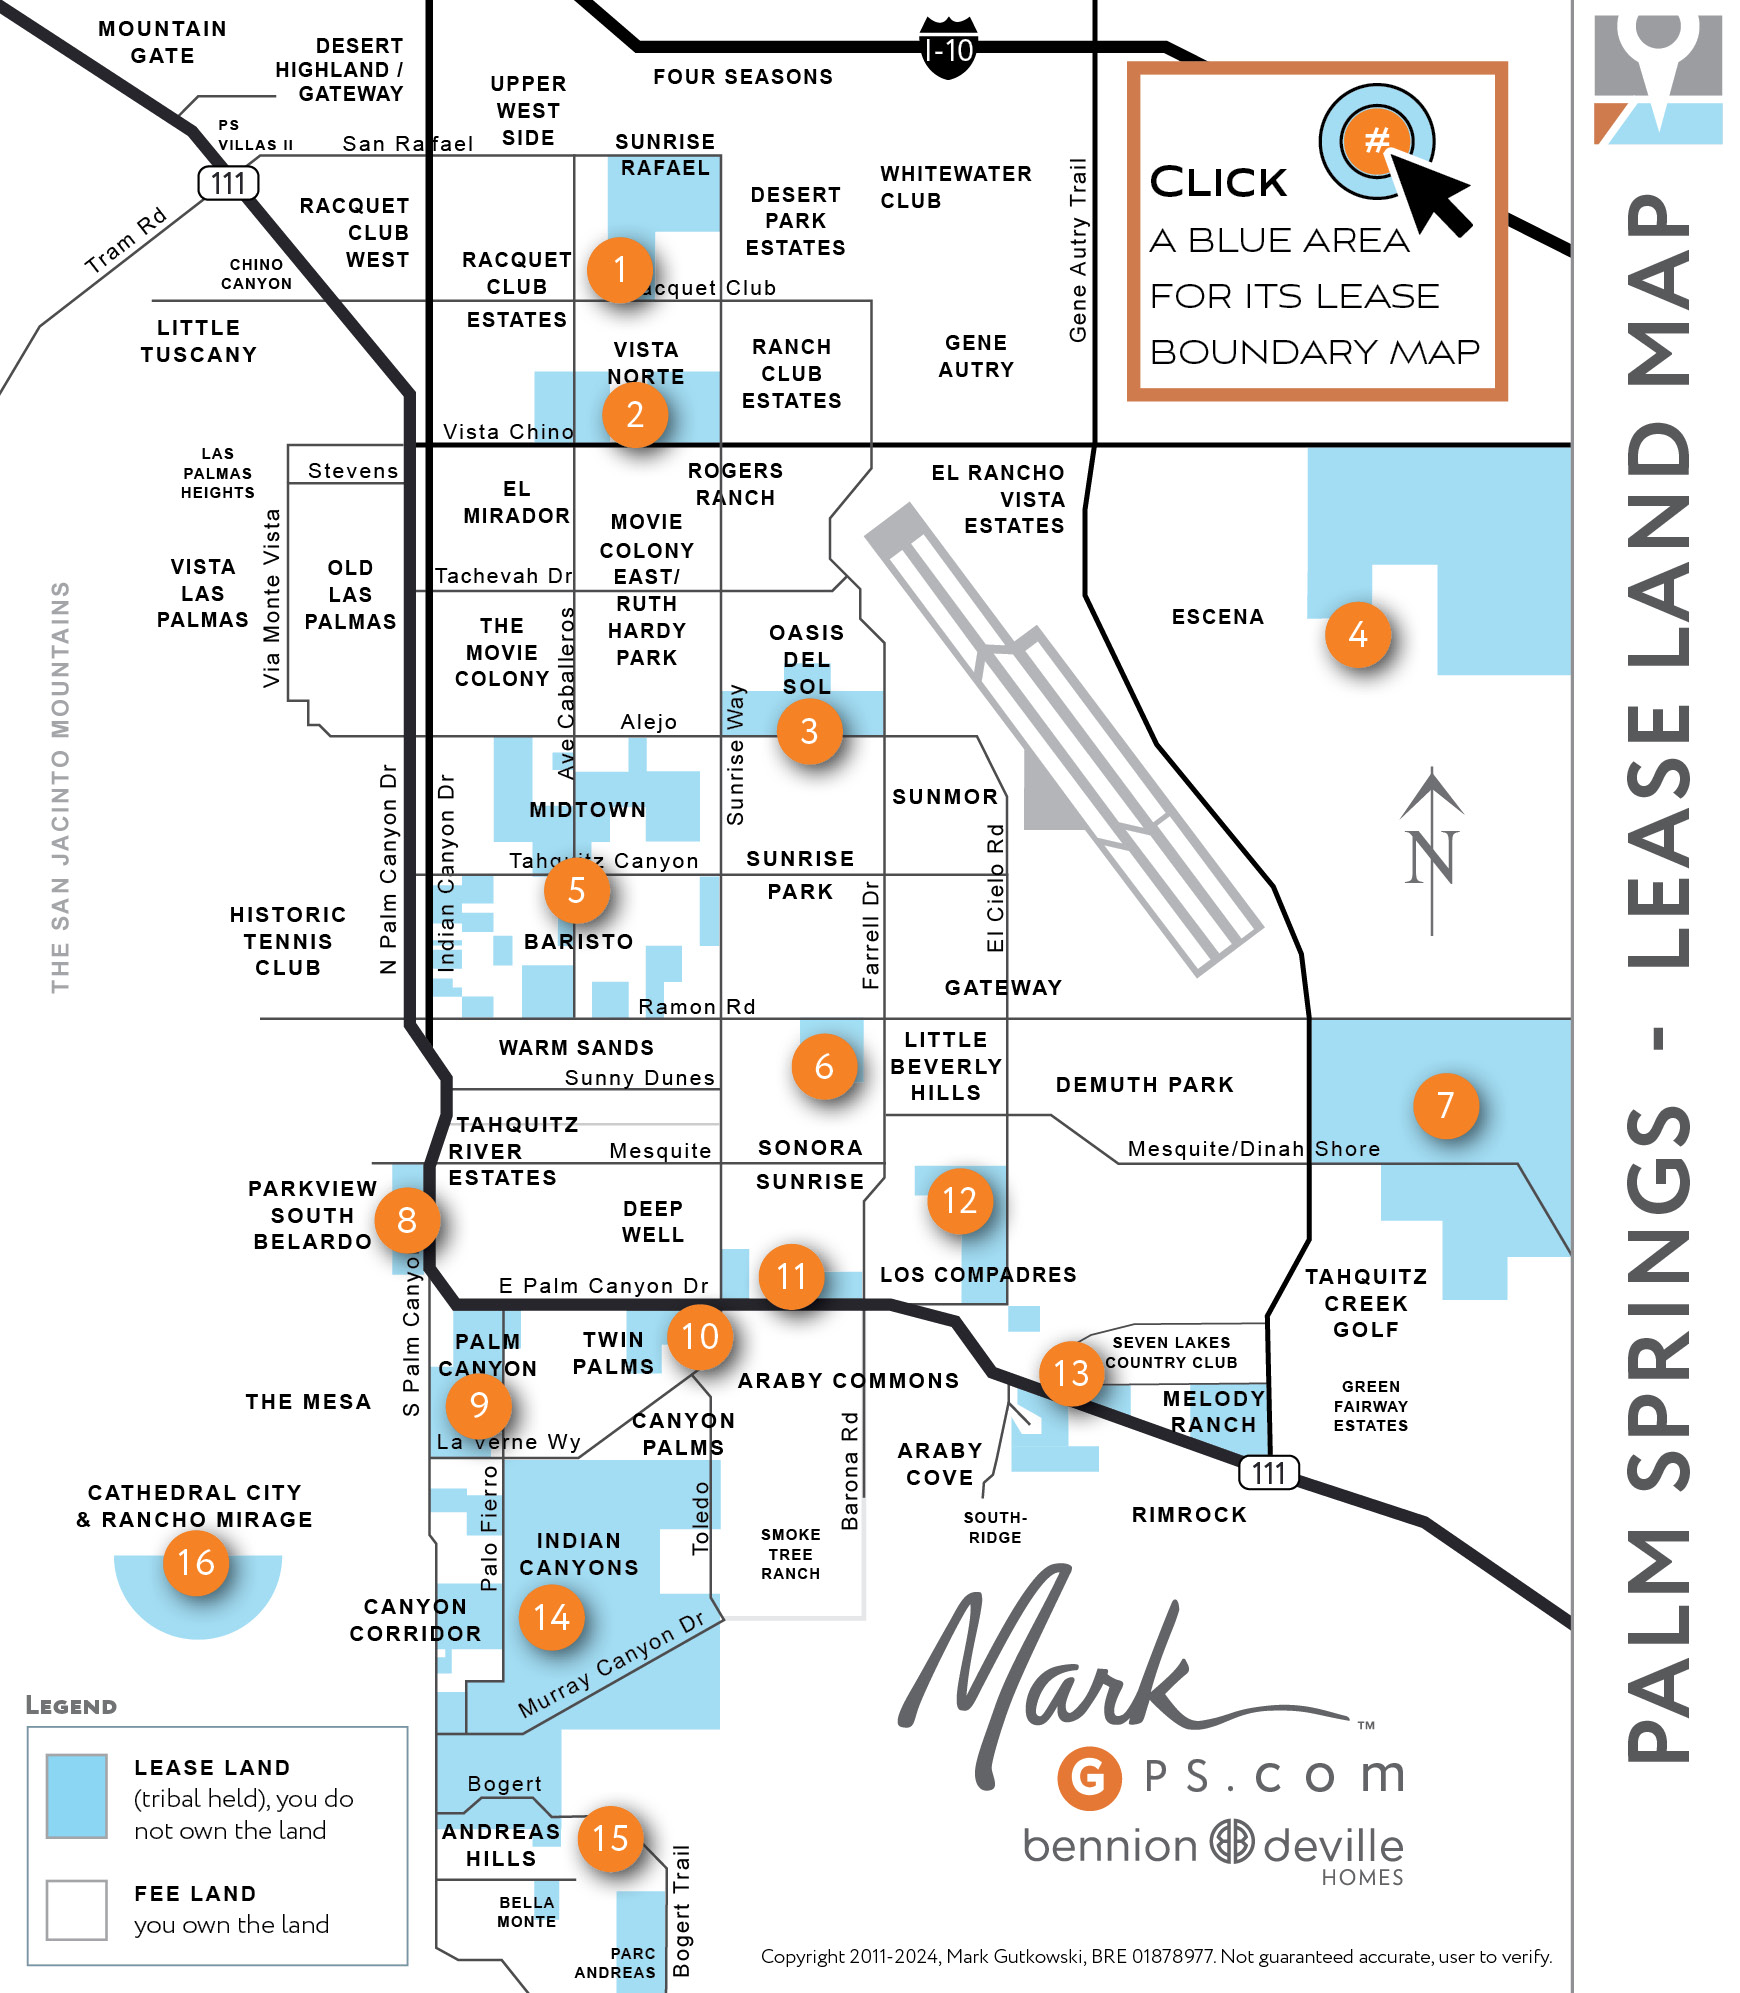 Palm Springs lease Land, Palm Springs Lease Land map showing all Palm Springs Indian Lease Land and all Palm Springs neighborhoods. Palm Springs Lease Land vs Fee Land, or Palm Springs Leased Land vs Fee Land. Find where Indian Leased land locations are using the Palm Springs Neighborhood Map and bring up any Palm Springs leased land of the Agua Caliente Band of Indian Lease Land Map to see the Indian lease land boundary map for each Palm Springs Neighborhood. The invisible checkerboard of lease land throughout Palm Springs, Cathedral City, and Rancho Mirage will show where lease land vs Fee Land is located. Palm Springs Lease Land by Neighborhood and Lease Expirations and Lease Land Expiration Calculator for Short Land Leases, Lease Land Buyout informaiton, and Lease Land Extentions,